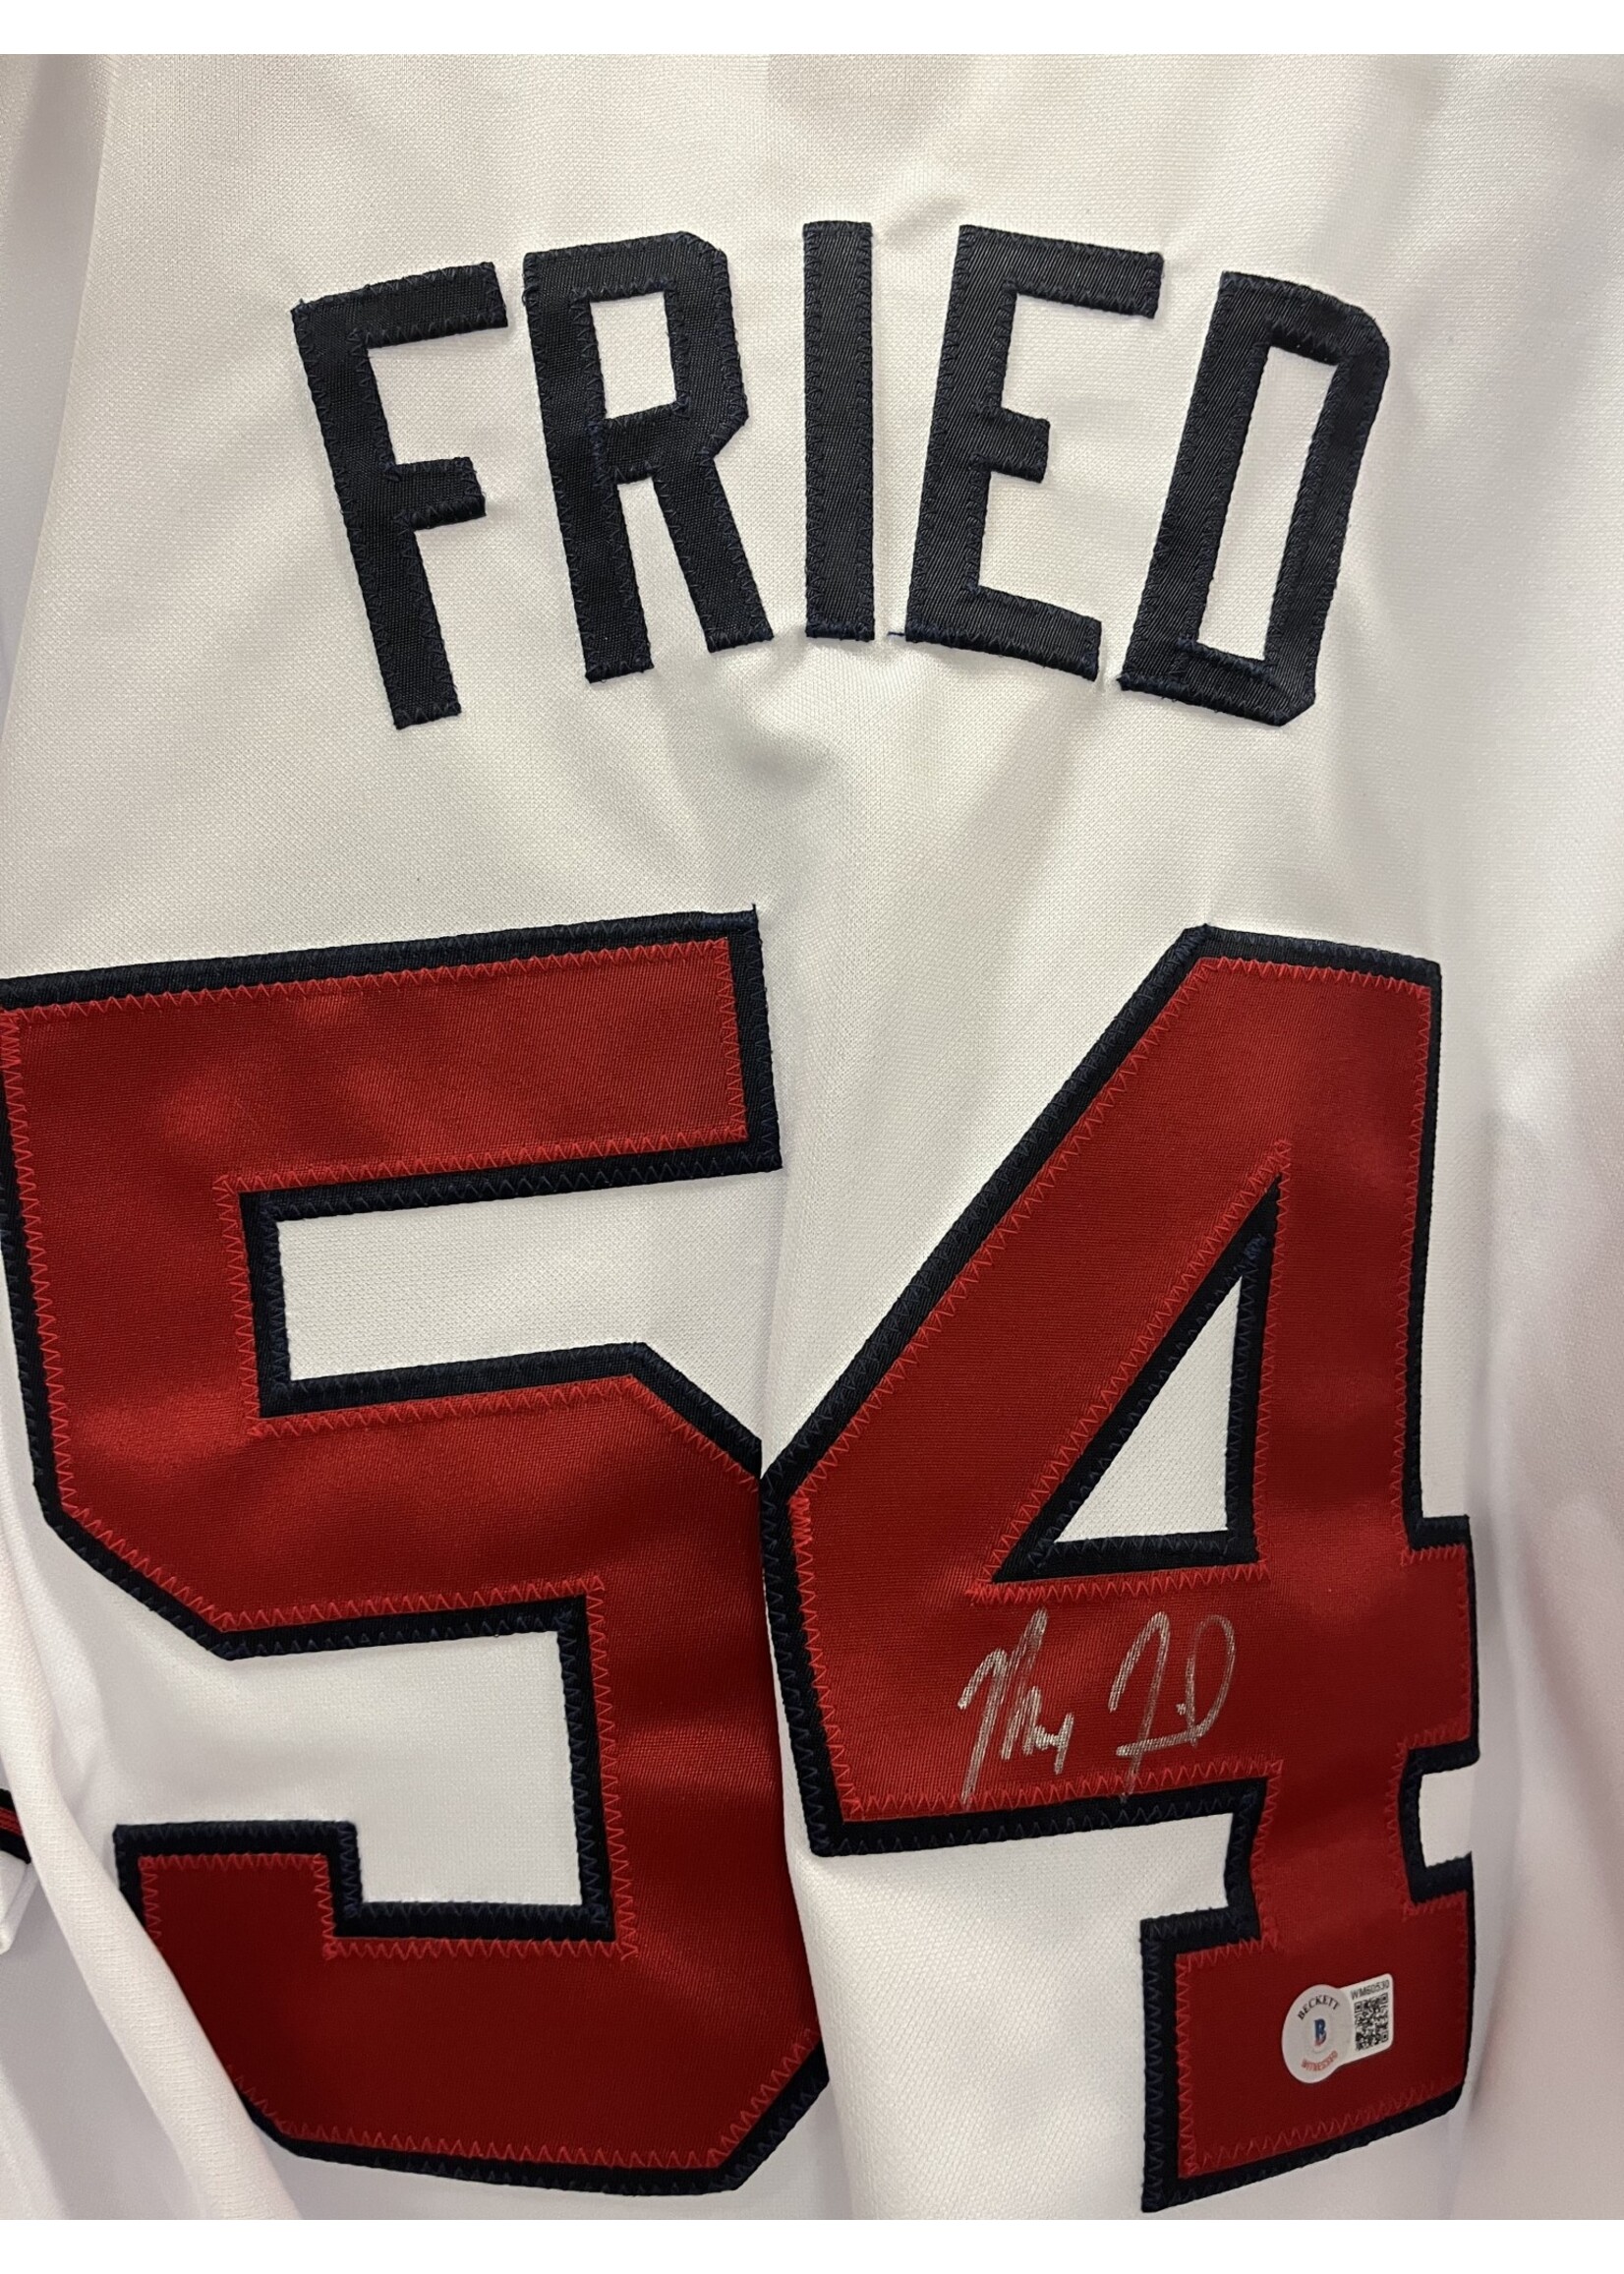 Max Fried Jersey